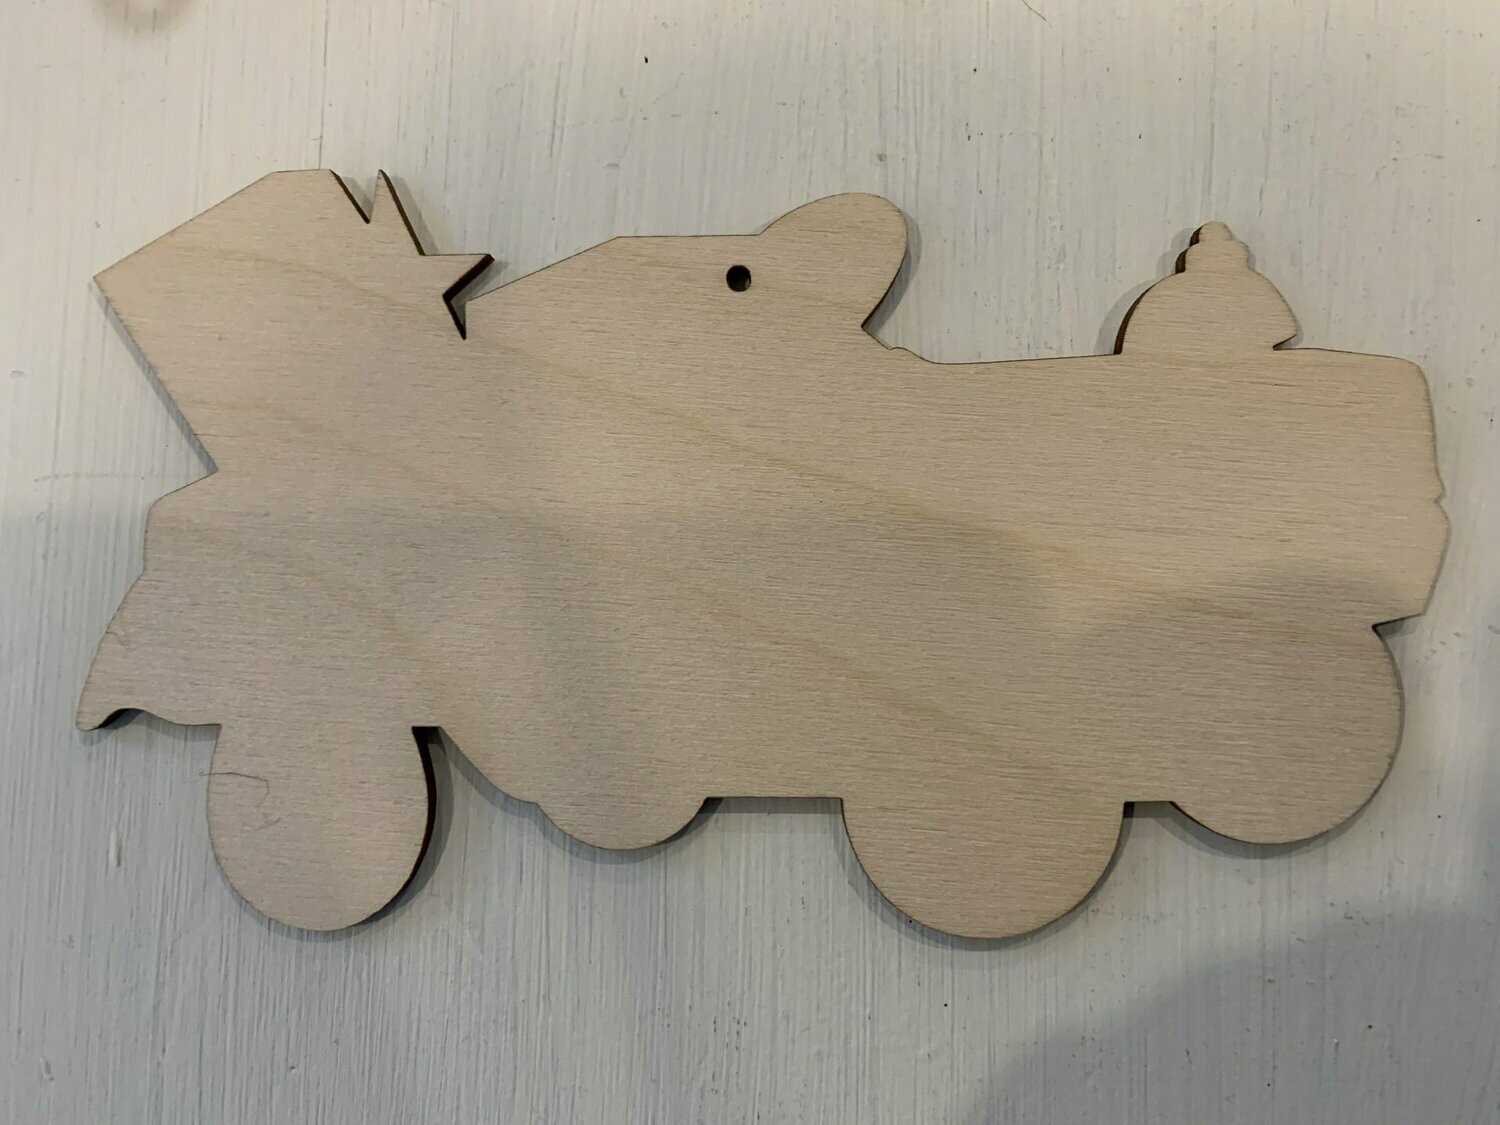 Wood cut out for Firetruck Ornament